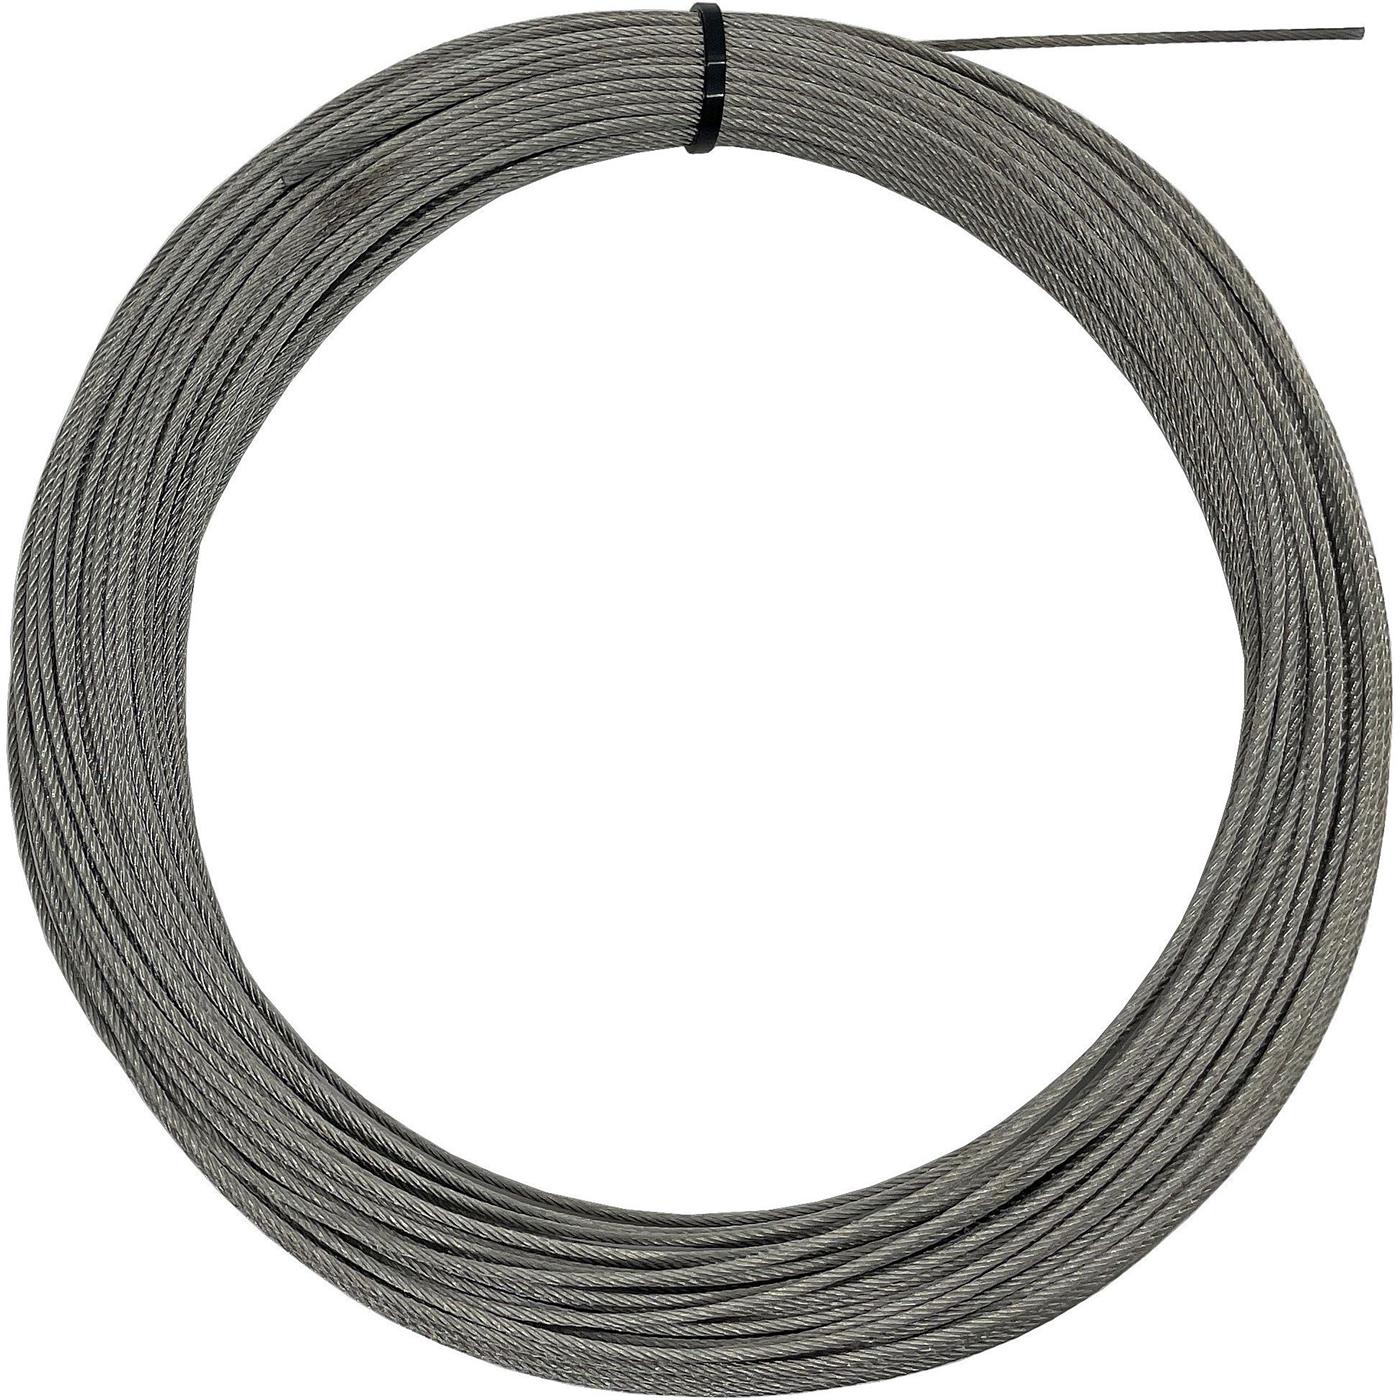 Wire rope 100m Stainless steel V4A 316 1,5mm 7x19 Ropes stainless for trellis systems